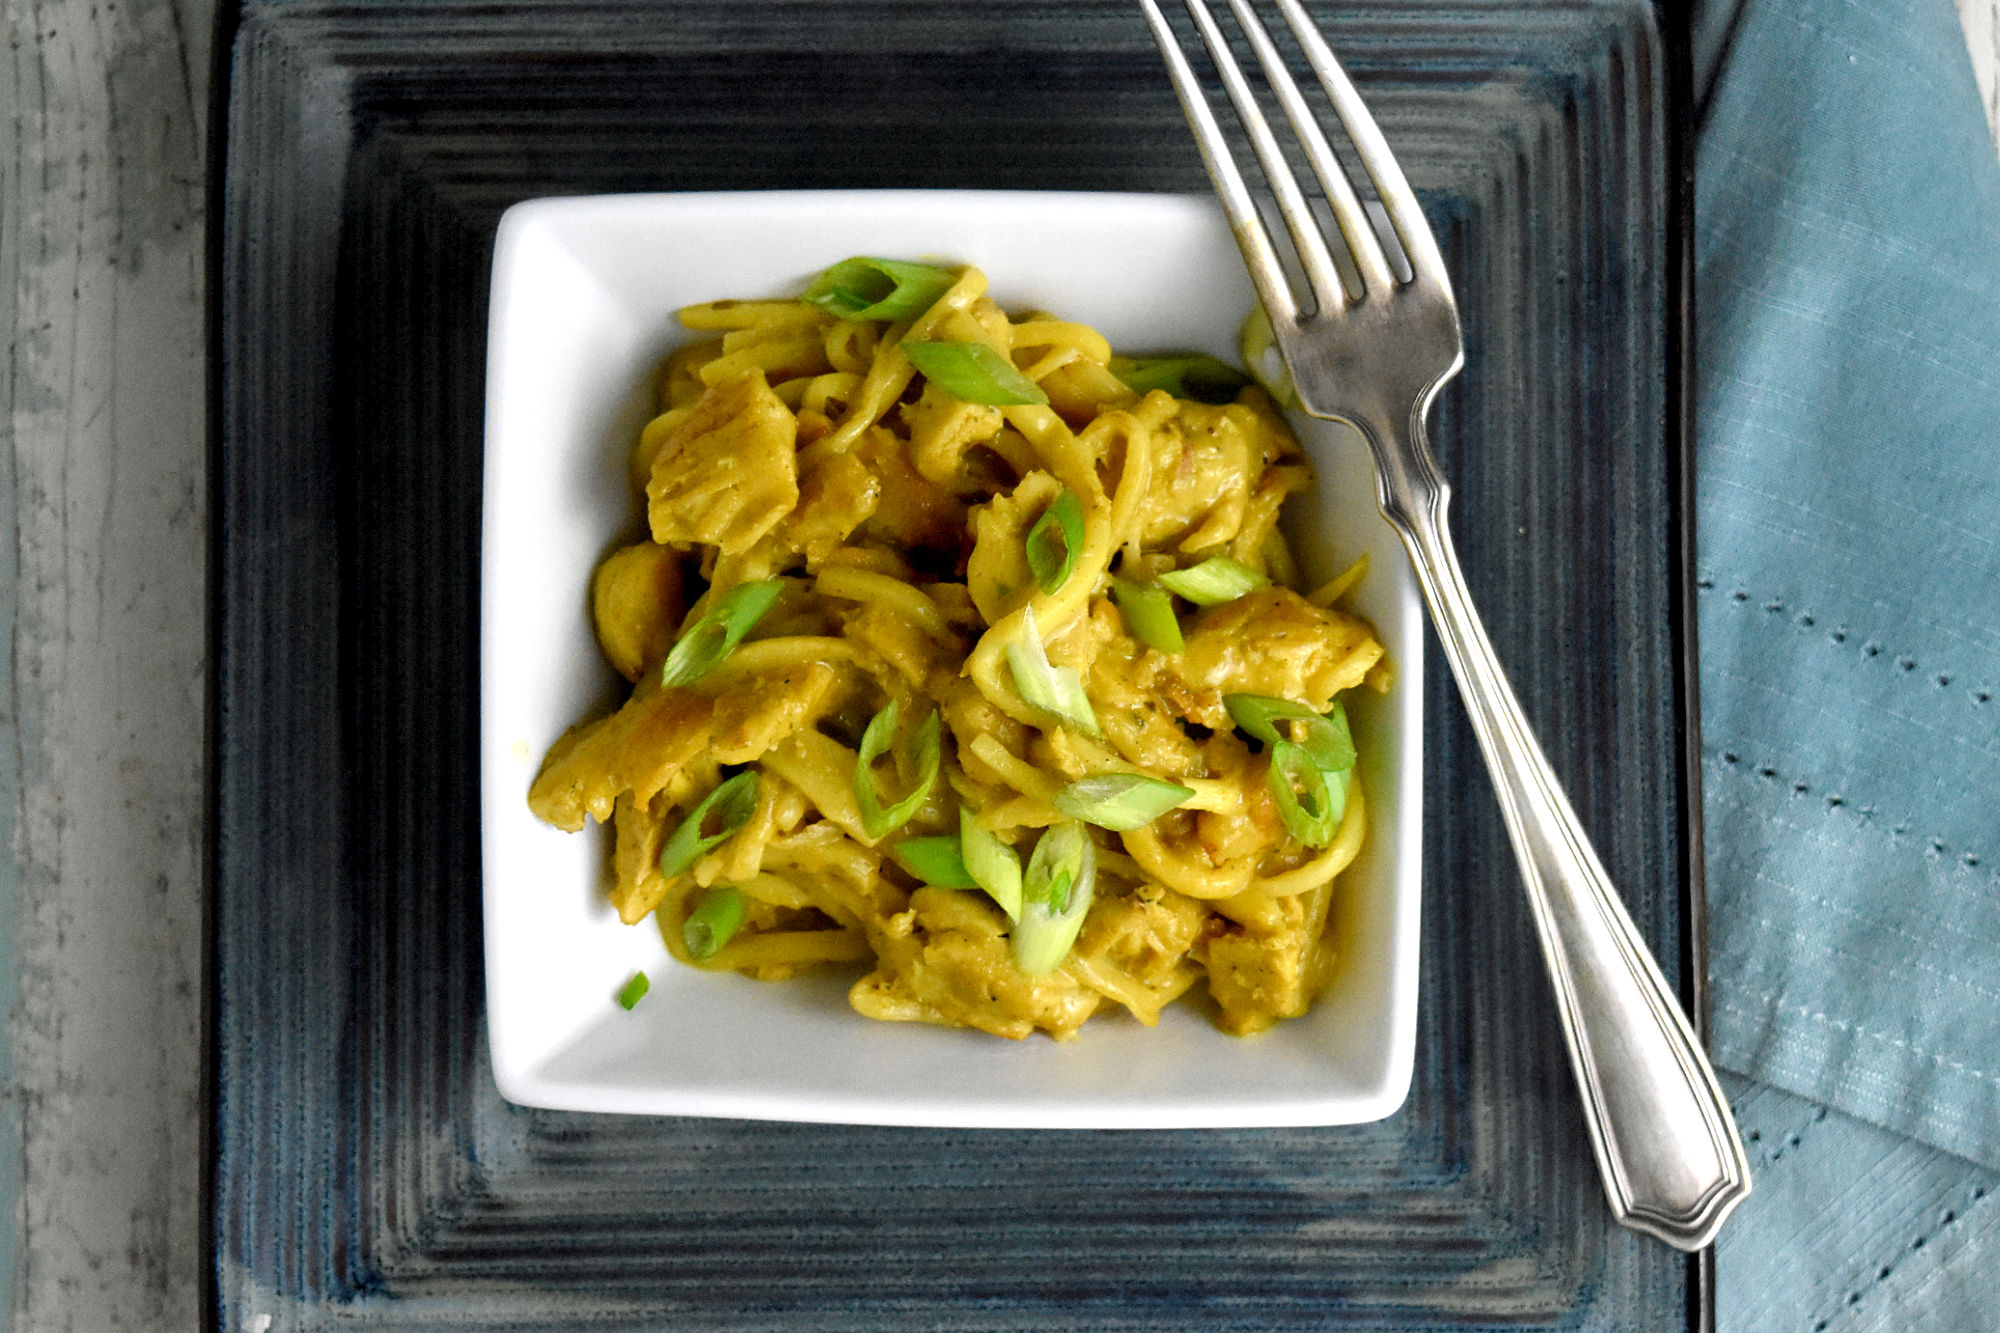 Thai Curry Chicken Pasta is rich, delicious, full of curry coconut richness.  This recipe not only tastes amazing, but is also keto, paleo, and gluten free! #kevinsrecipechallenge #glutenfree #paleo #keto #heartsofpalmnoodles